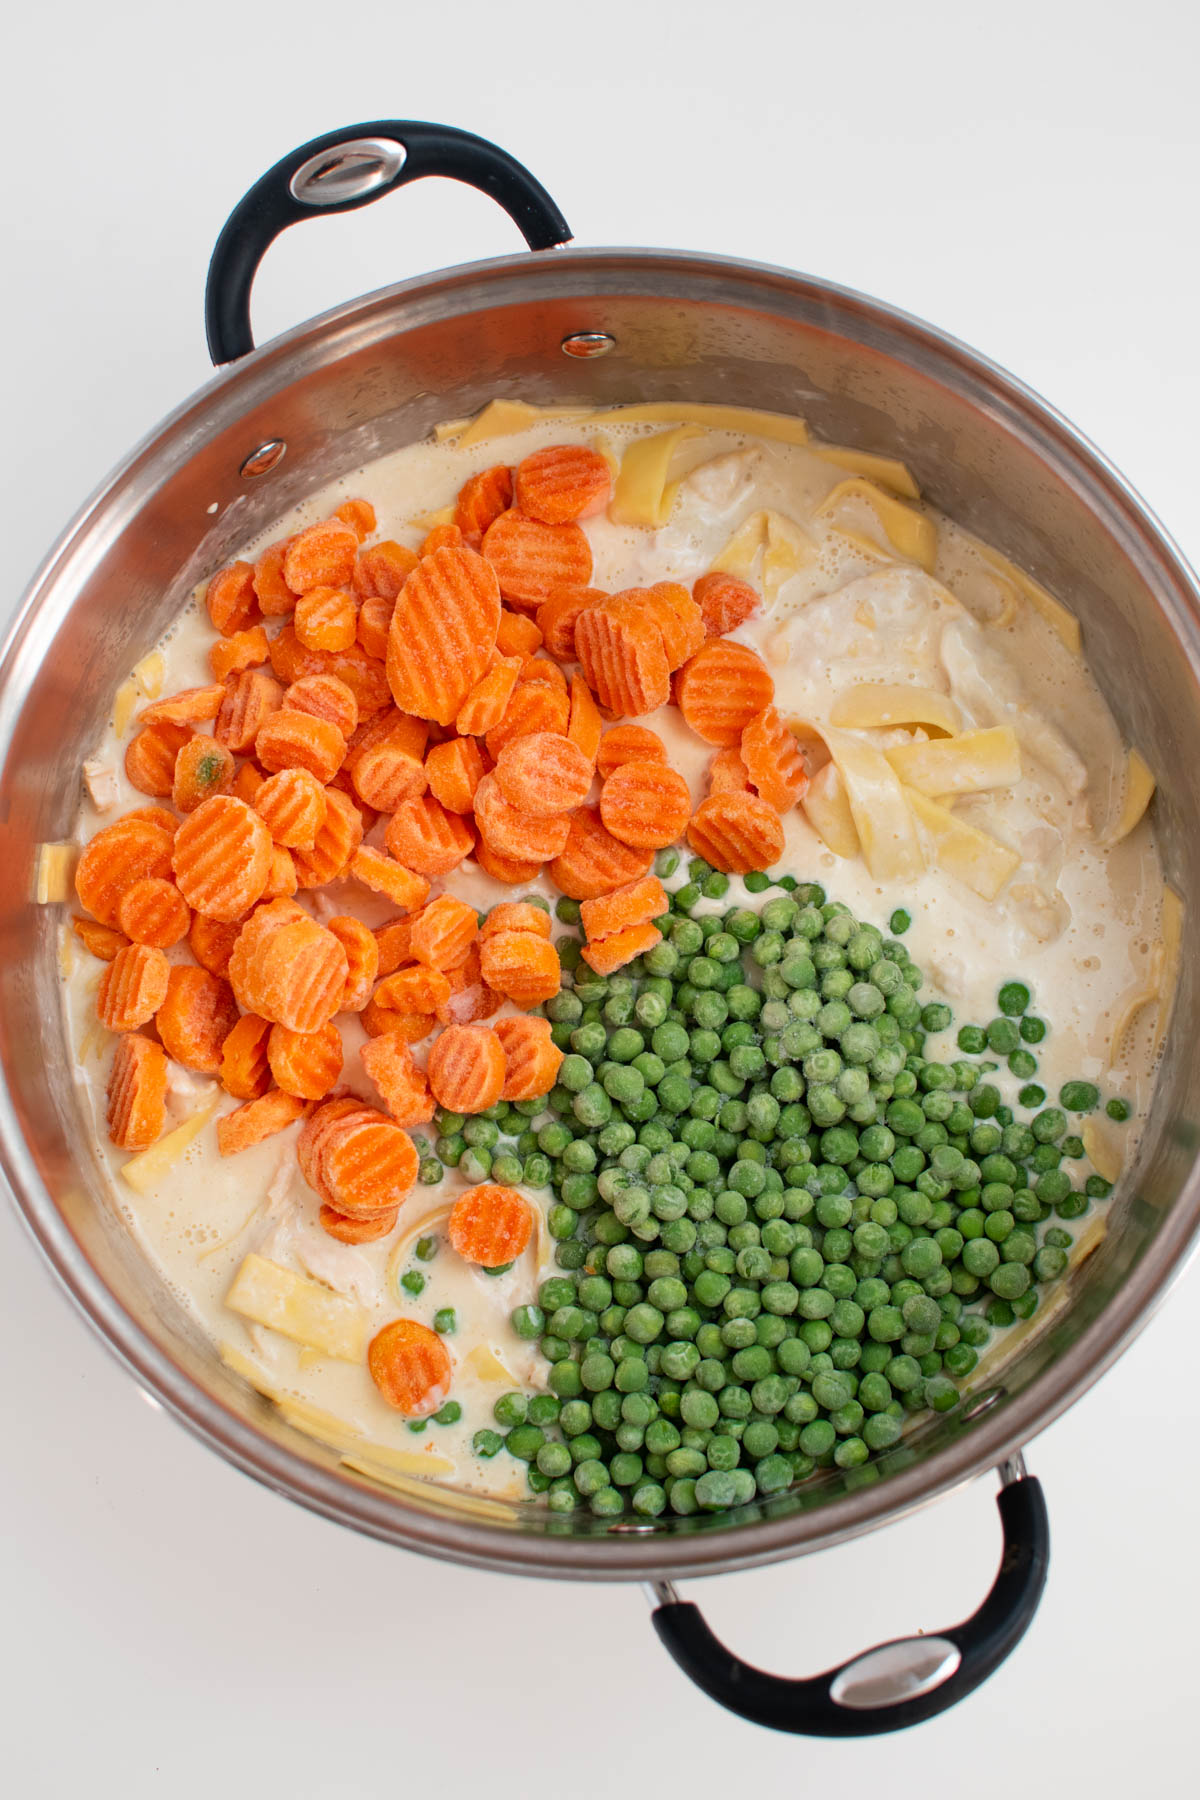 Frozen carrots and peas on top of creamy chicken noodle soup in large pot.